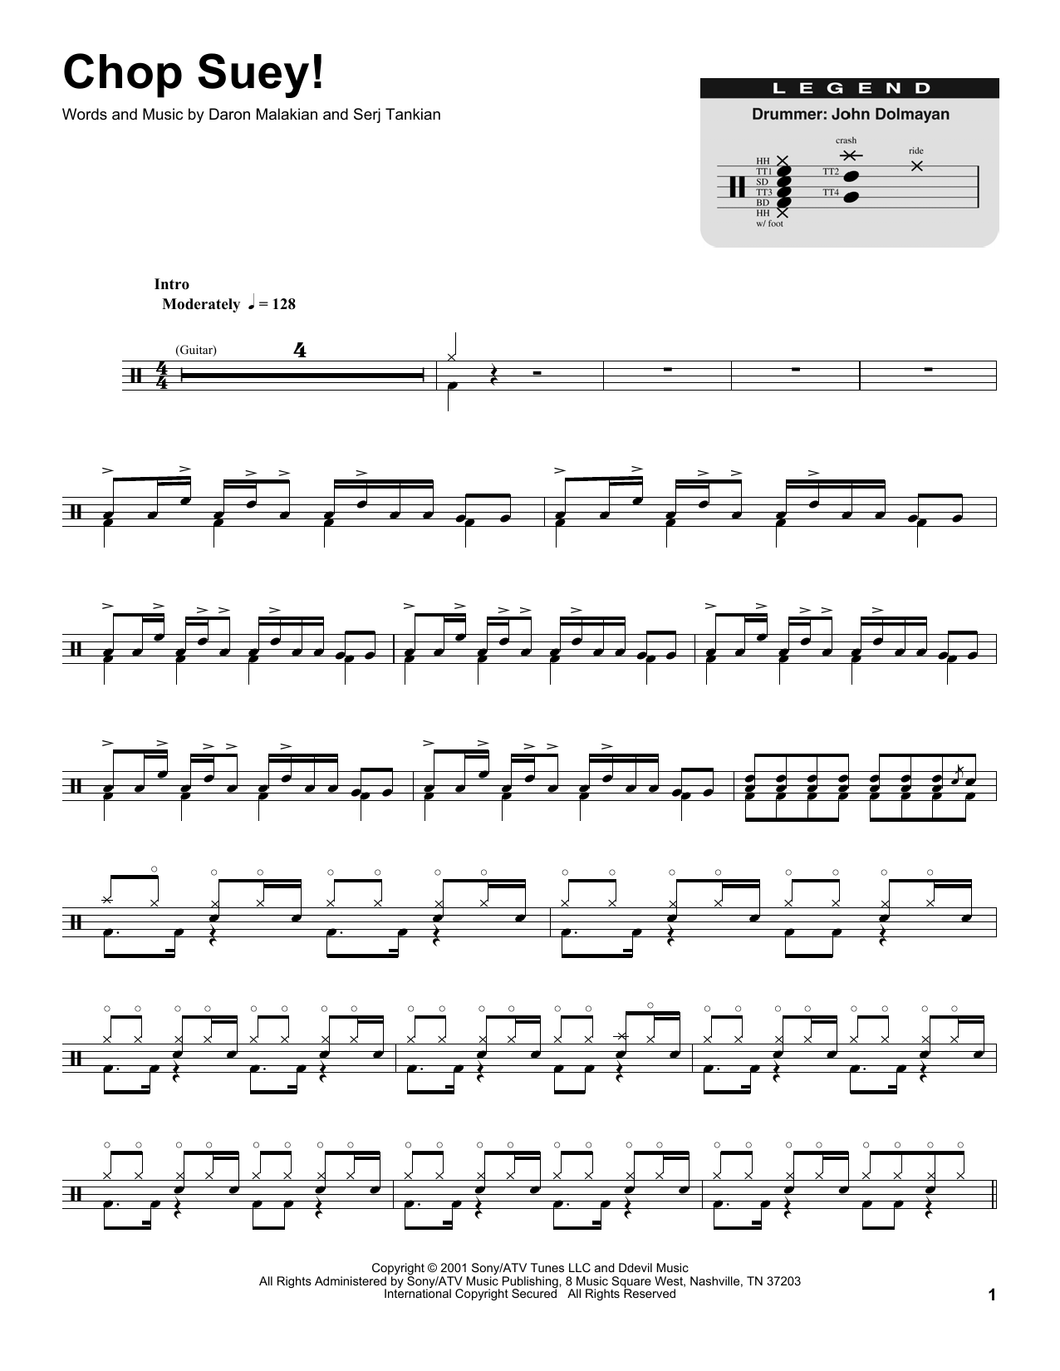 Chop Suey! - System of a Down - Full Drum Transcription / Drum Sheet Music - SheetMusicDirect DT174824